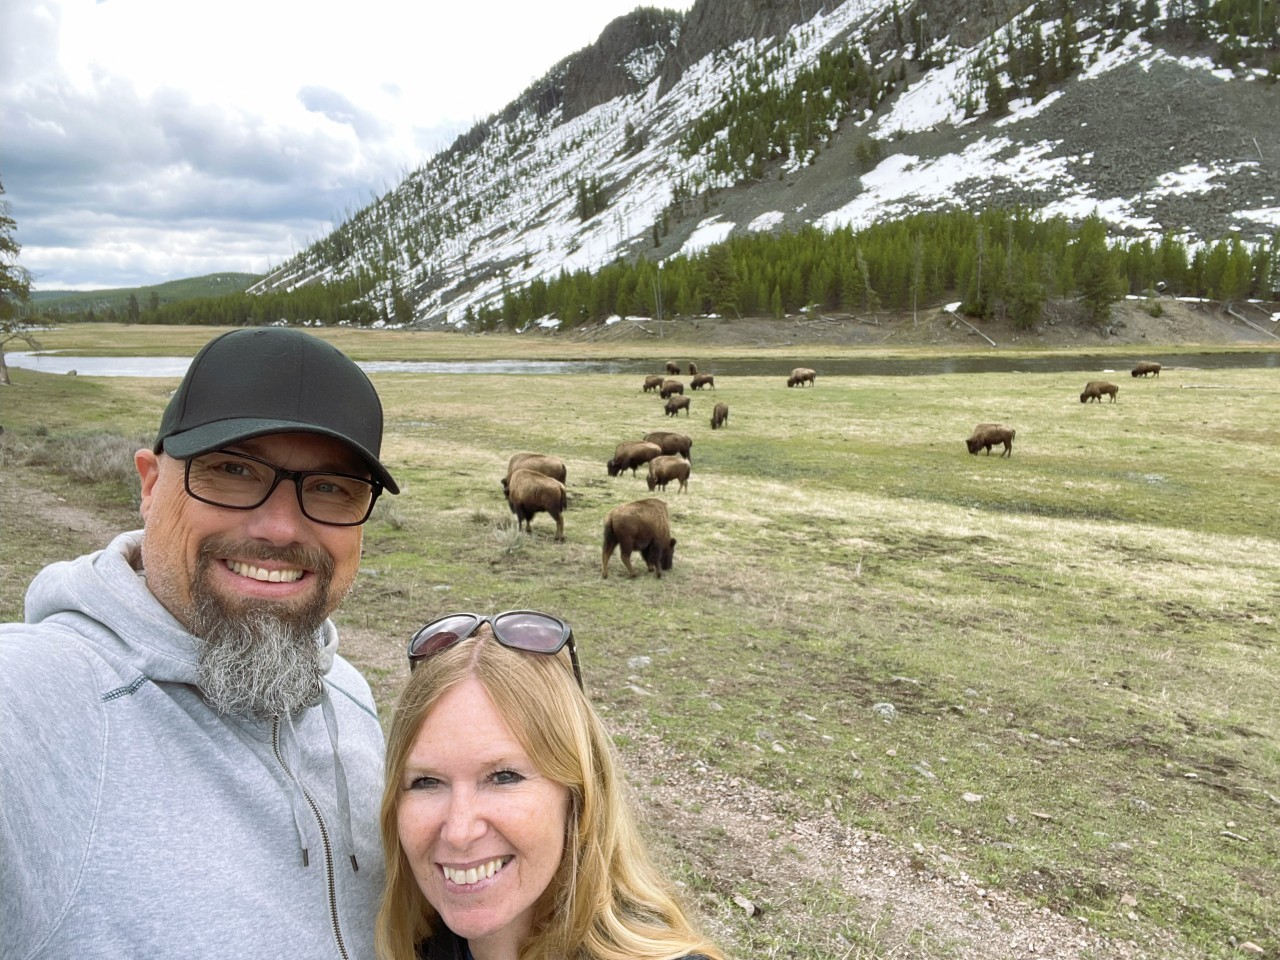 How to do a short visit to Yellowstone National Park